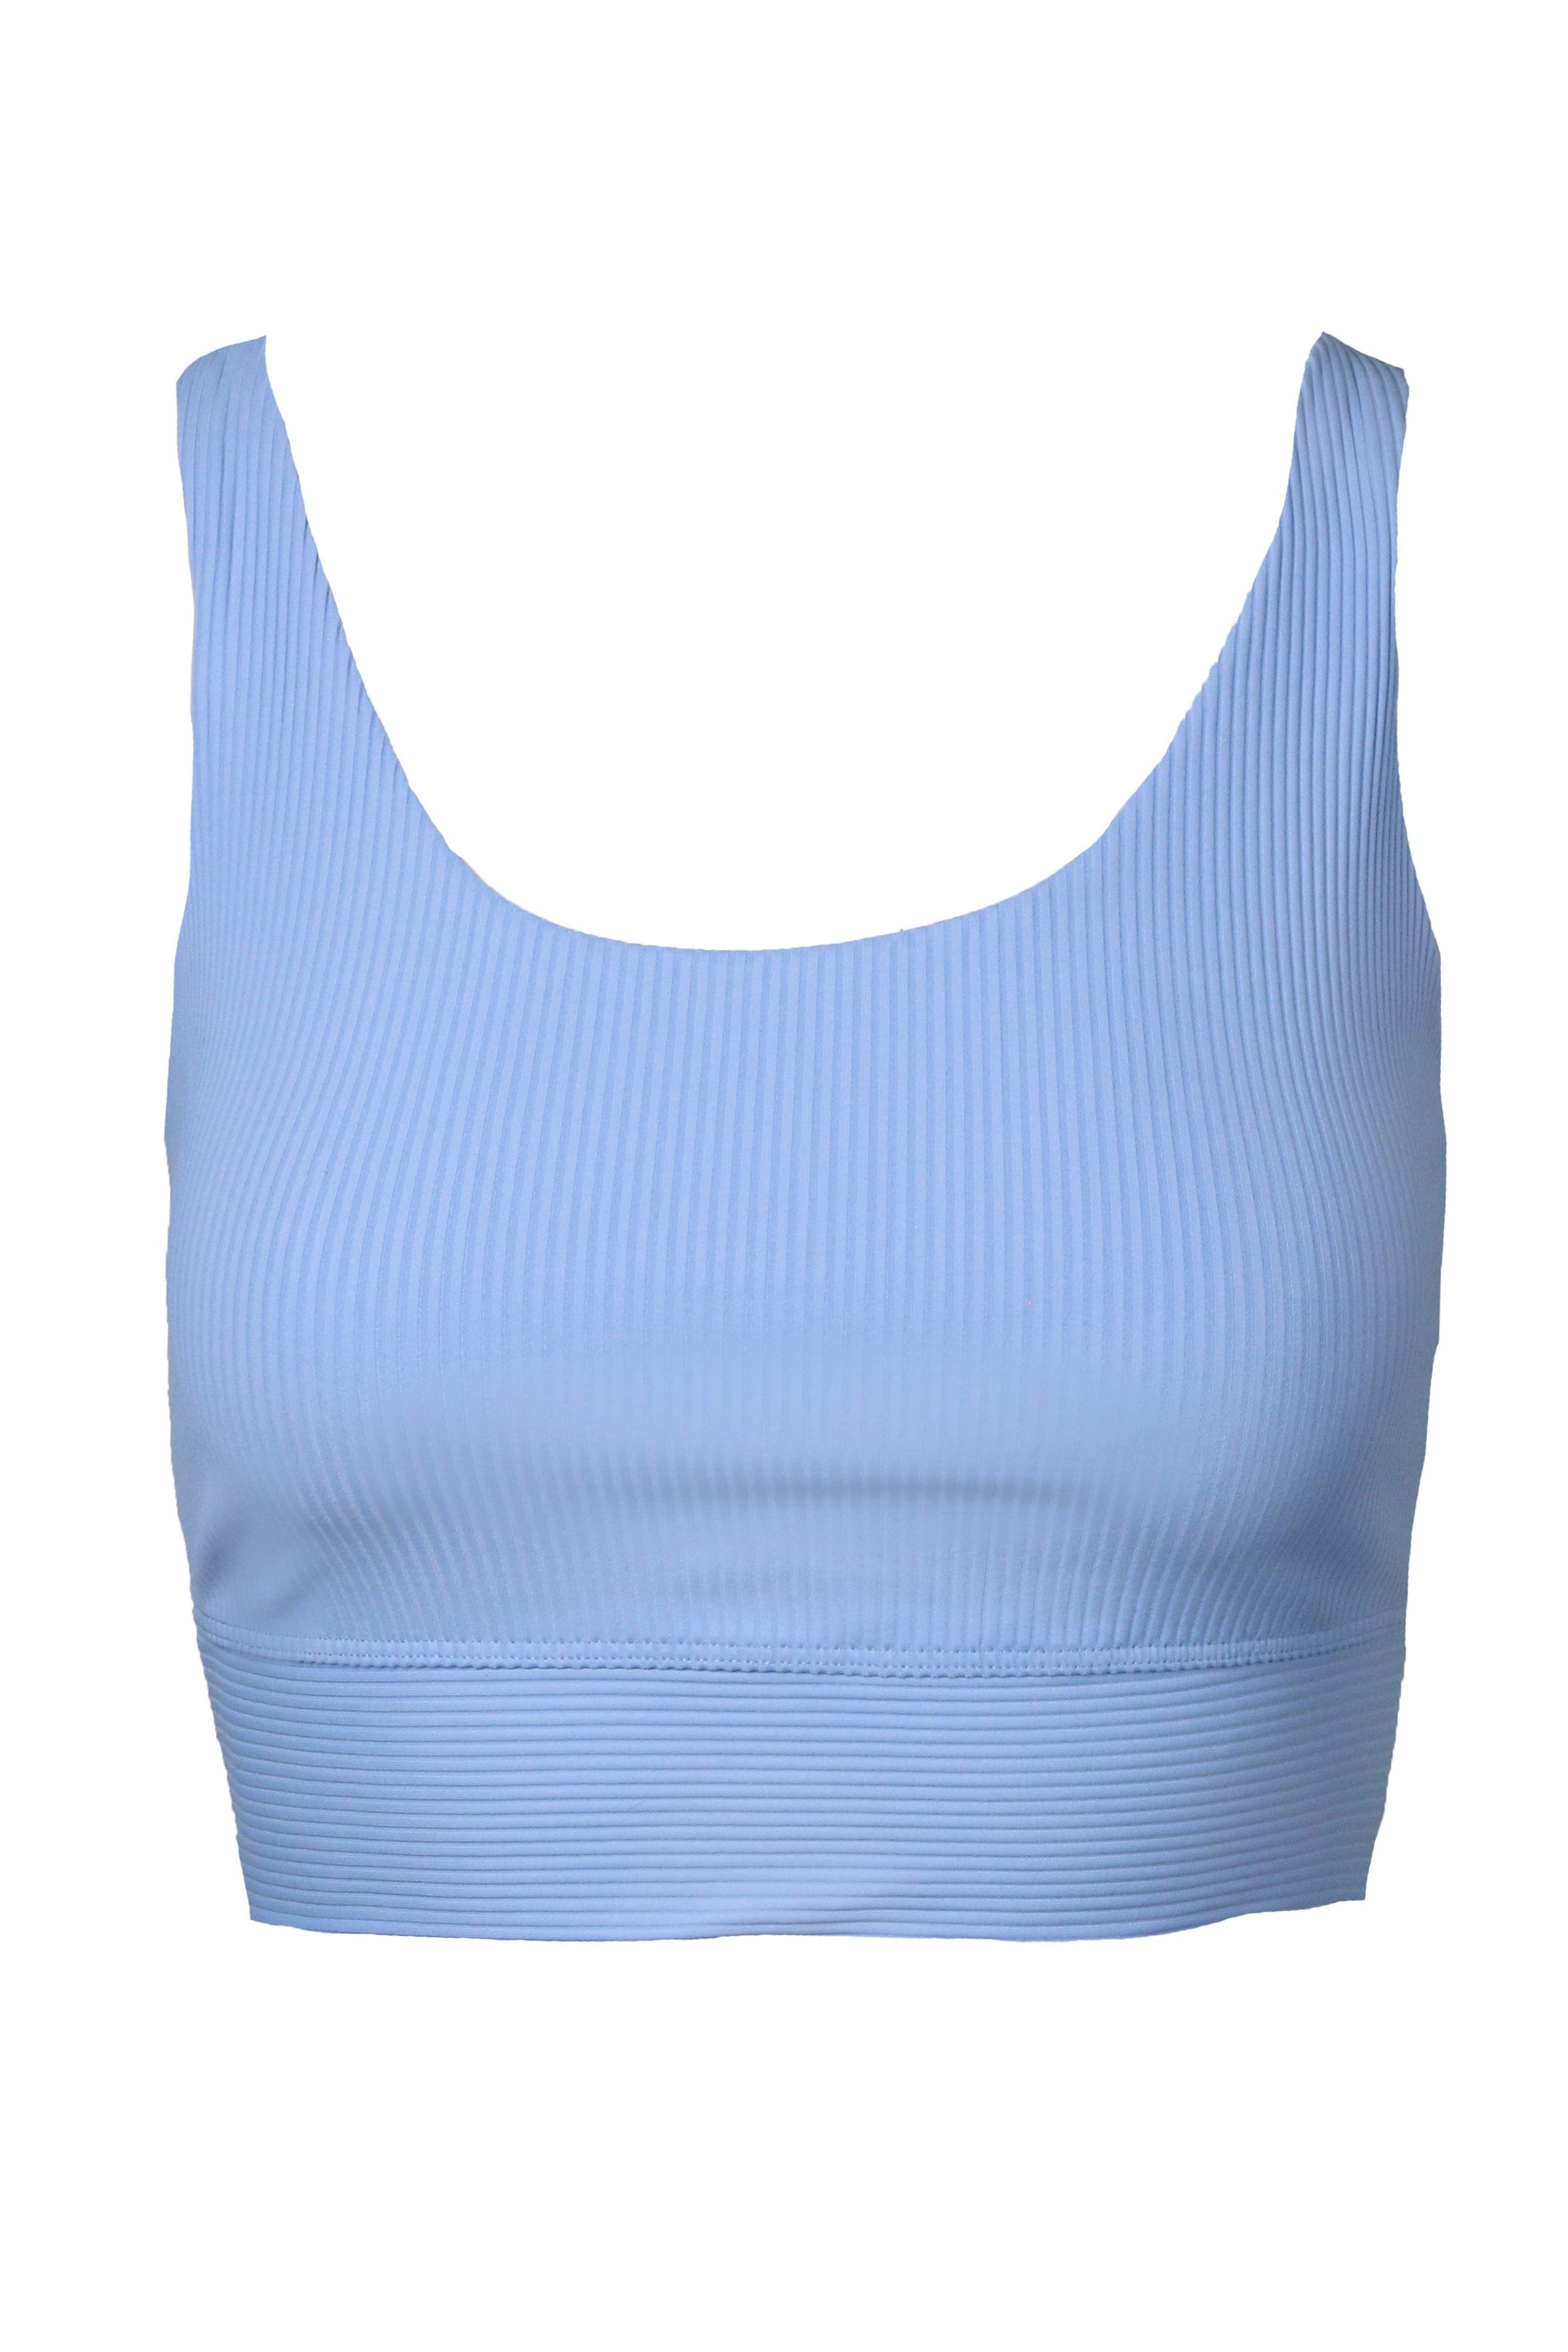 altiland Cami Sports Bra Tank Tops for Women Workout Yoga Athletic Exercise  Crop Tops Brami (Baby Blue, S) at  Women's Clothing store